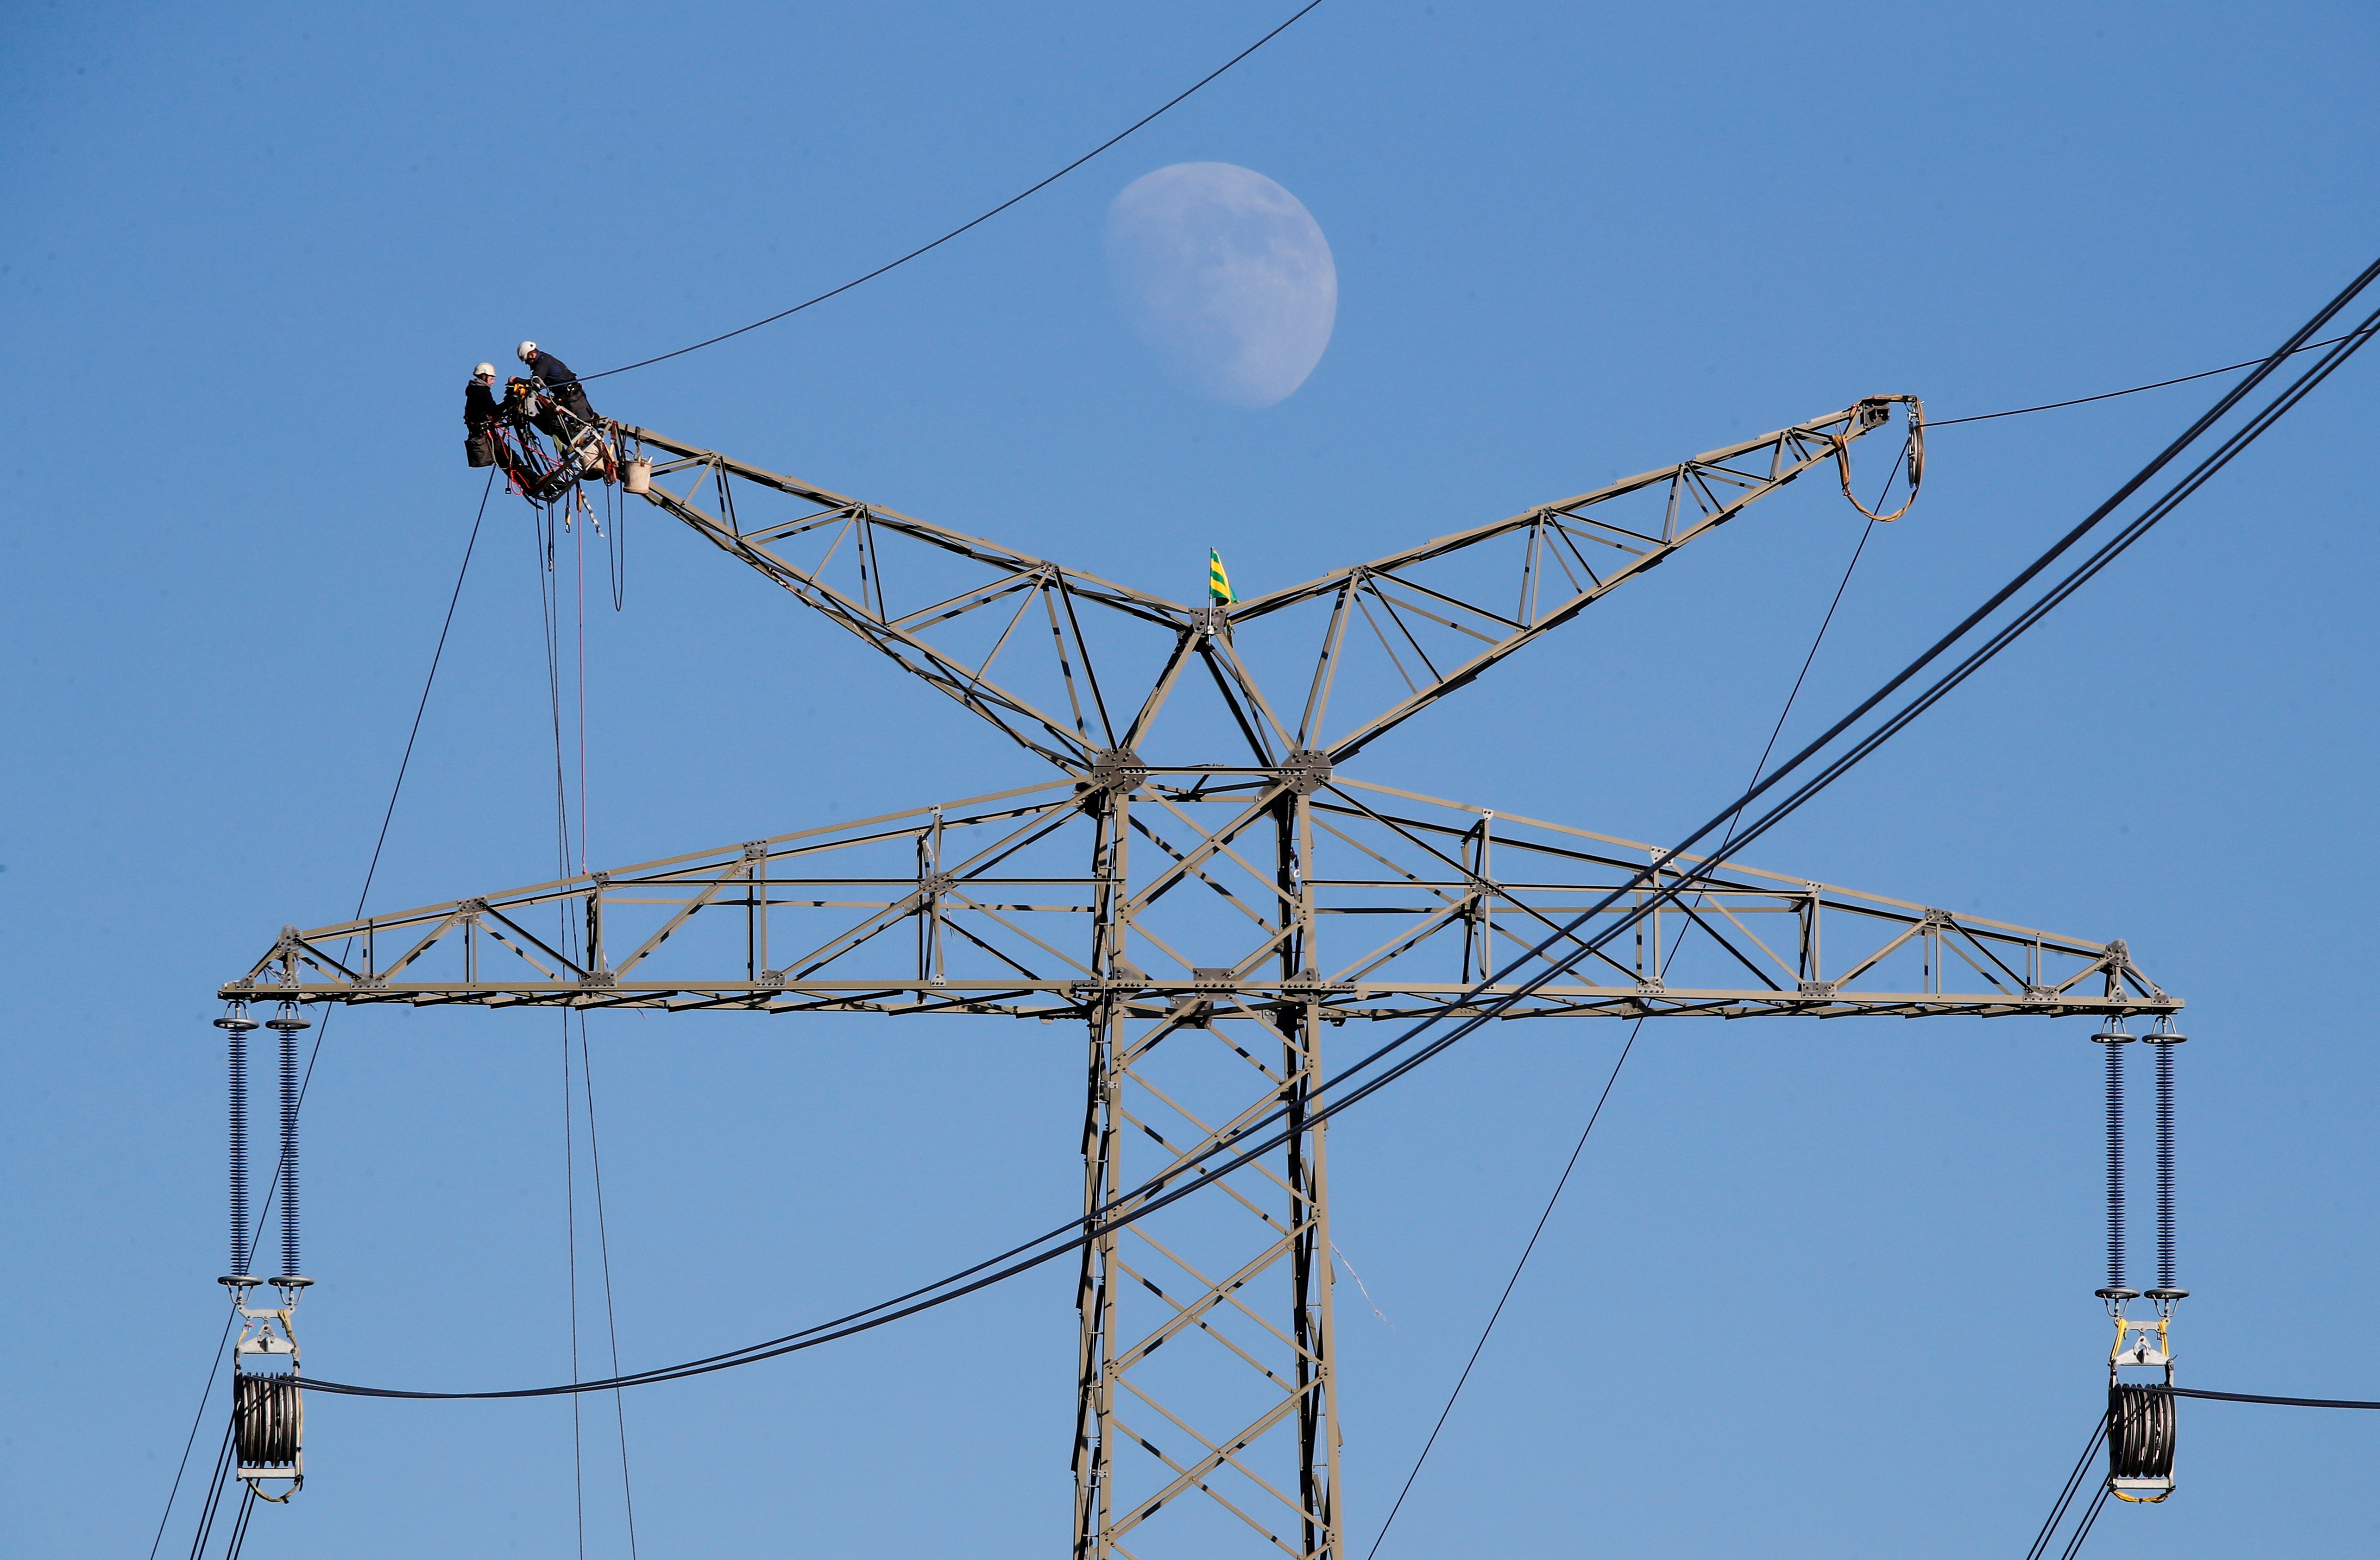 The moon rises as electricians work atop a power pole near the lignite power plant of Neurath of German energy supplier and utility RWE, near Rommerskirchen